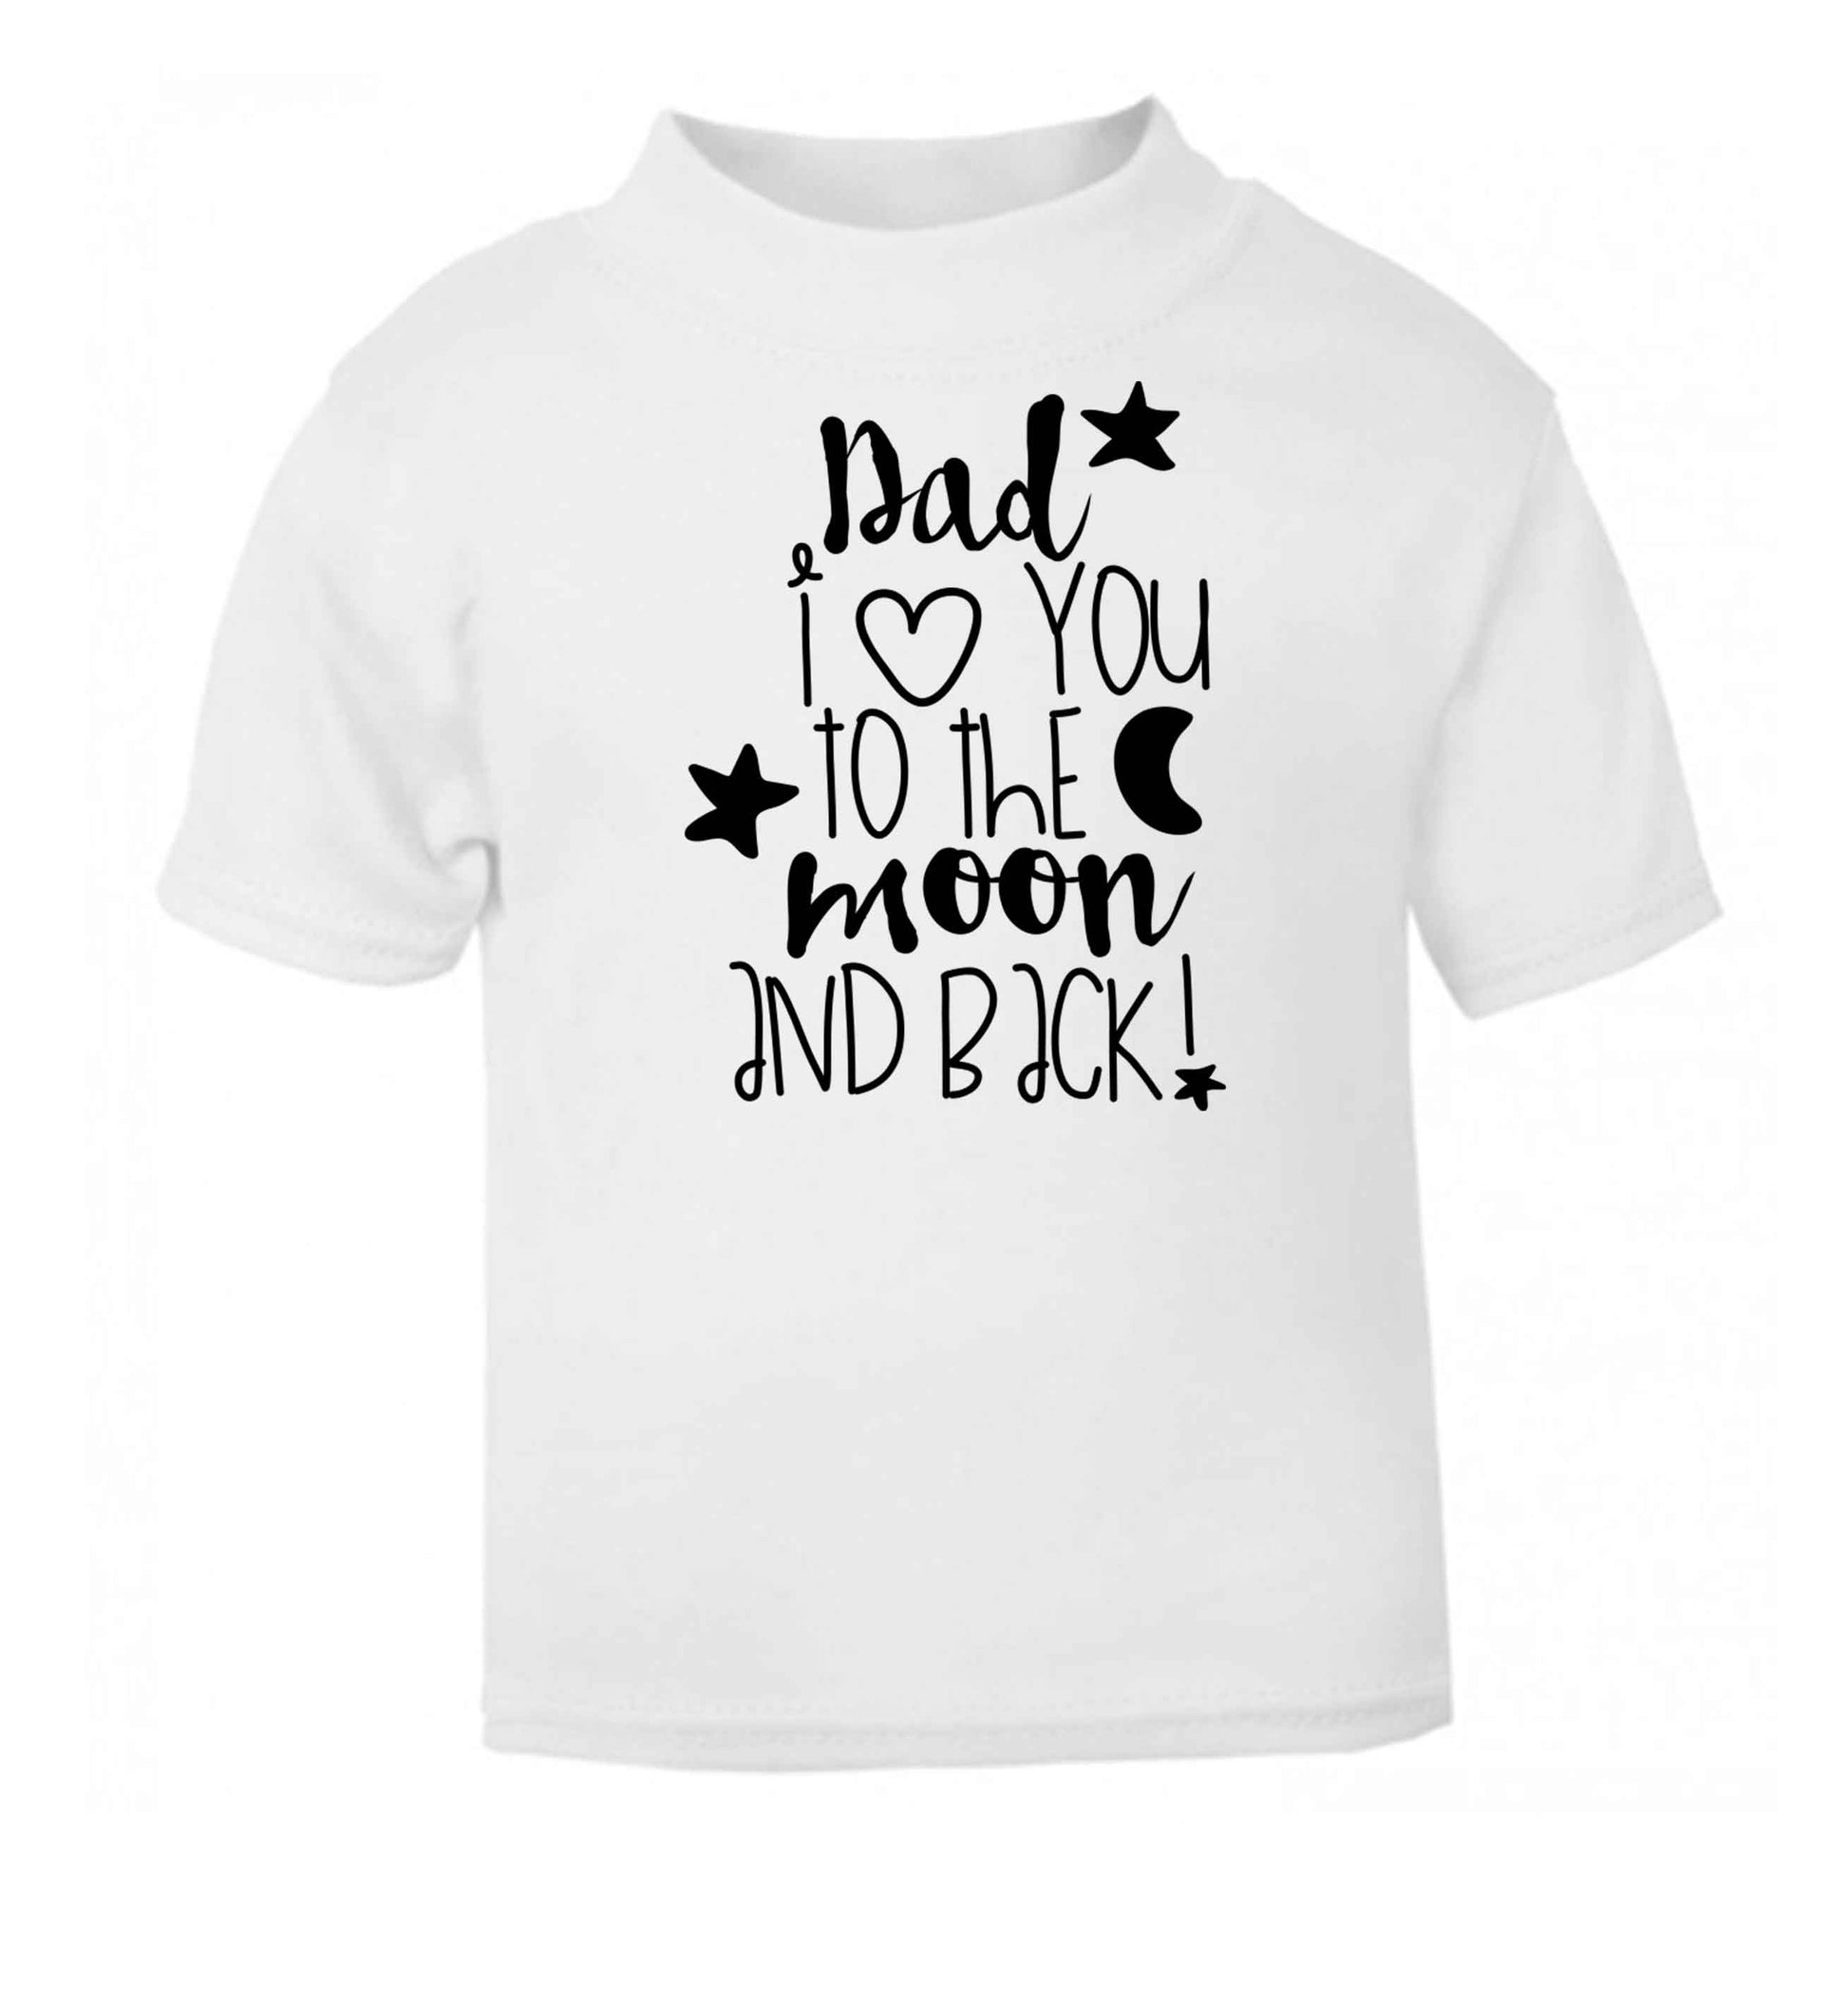 Dad I love you to the moon and back white baby toddler Tshirt 2 Years